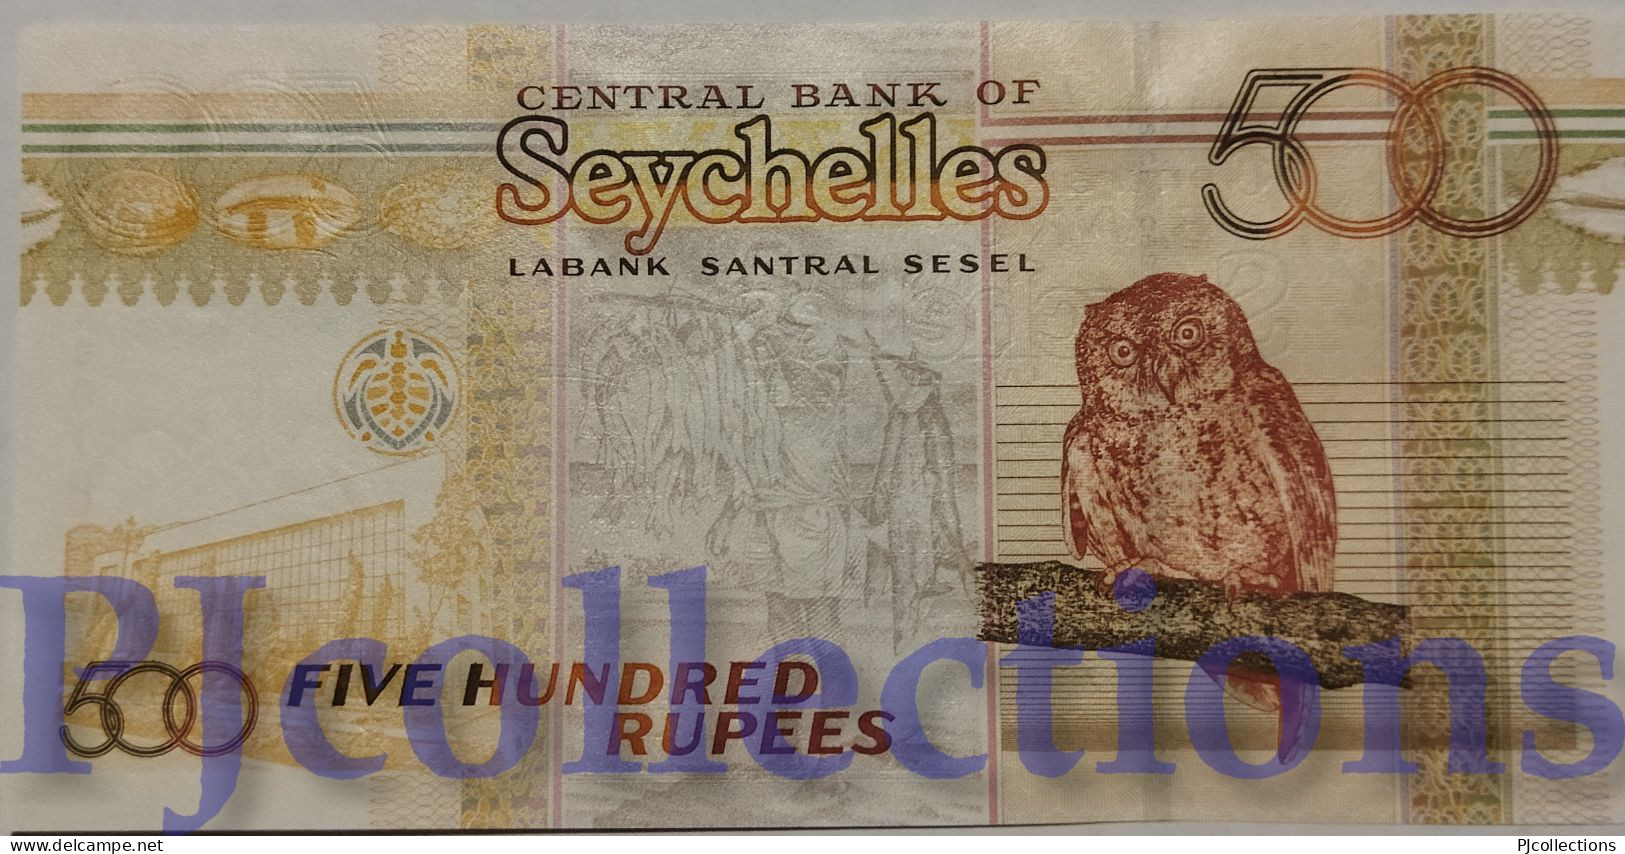 SEYCHELLES 500 RUPEES 2005 PICK 41 UNC LOW SERIAL NUMBER "AA001887" - Seychelles